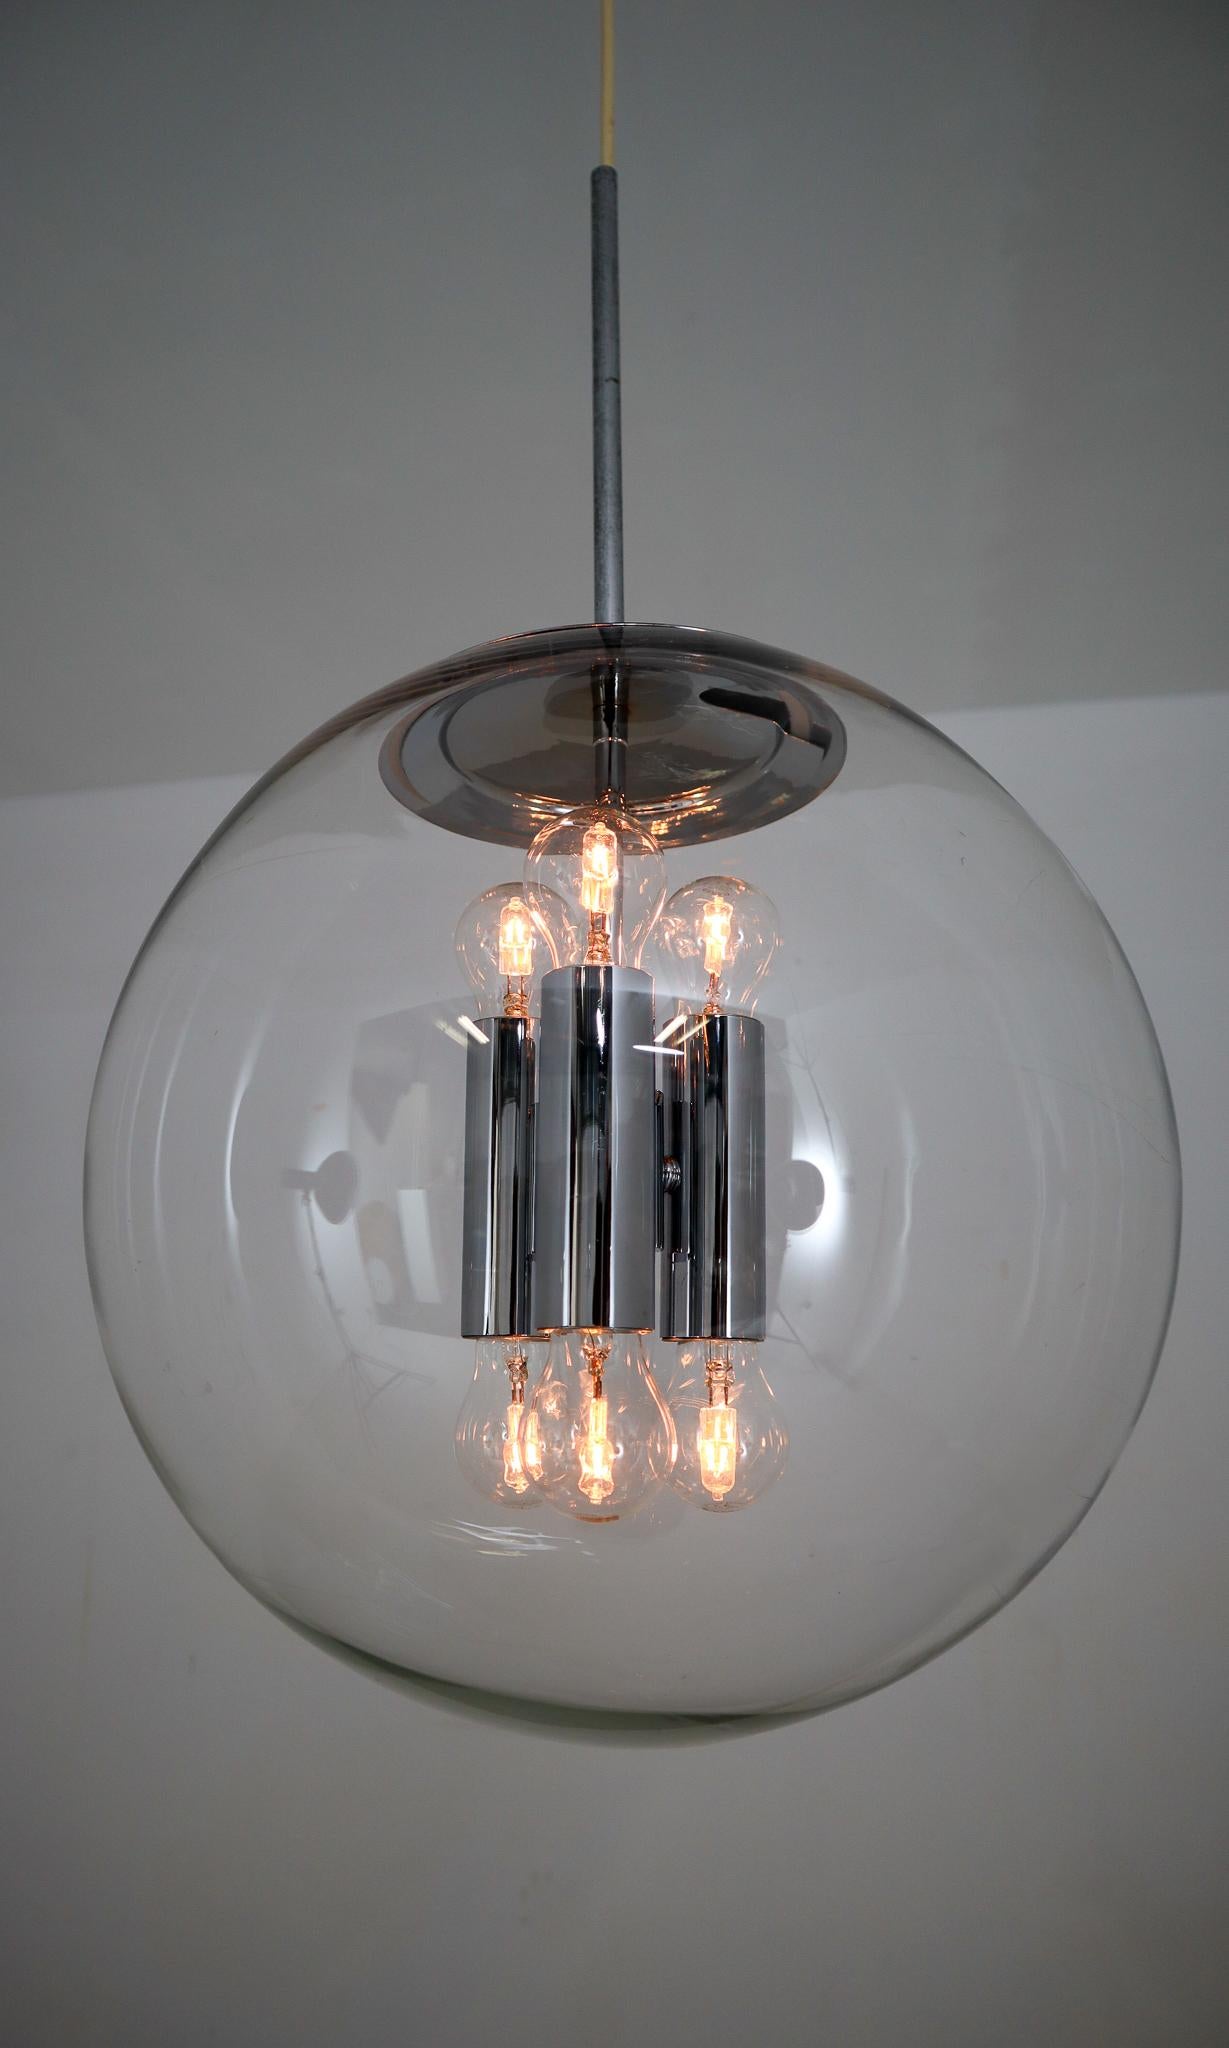 This large set hand blown pendant lamps were made by the German manufacturer Limburg Glashütte in the 1970s. The hand blown glass globes are mounted on a chrome base. These heavy quality light sculptures not only function as light sources but also